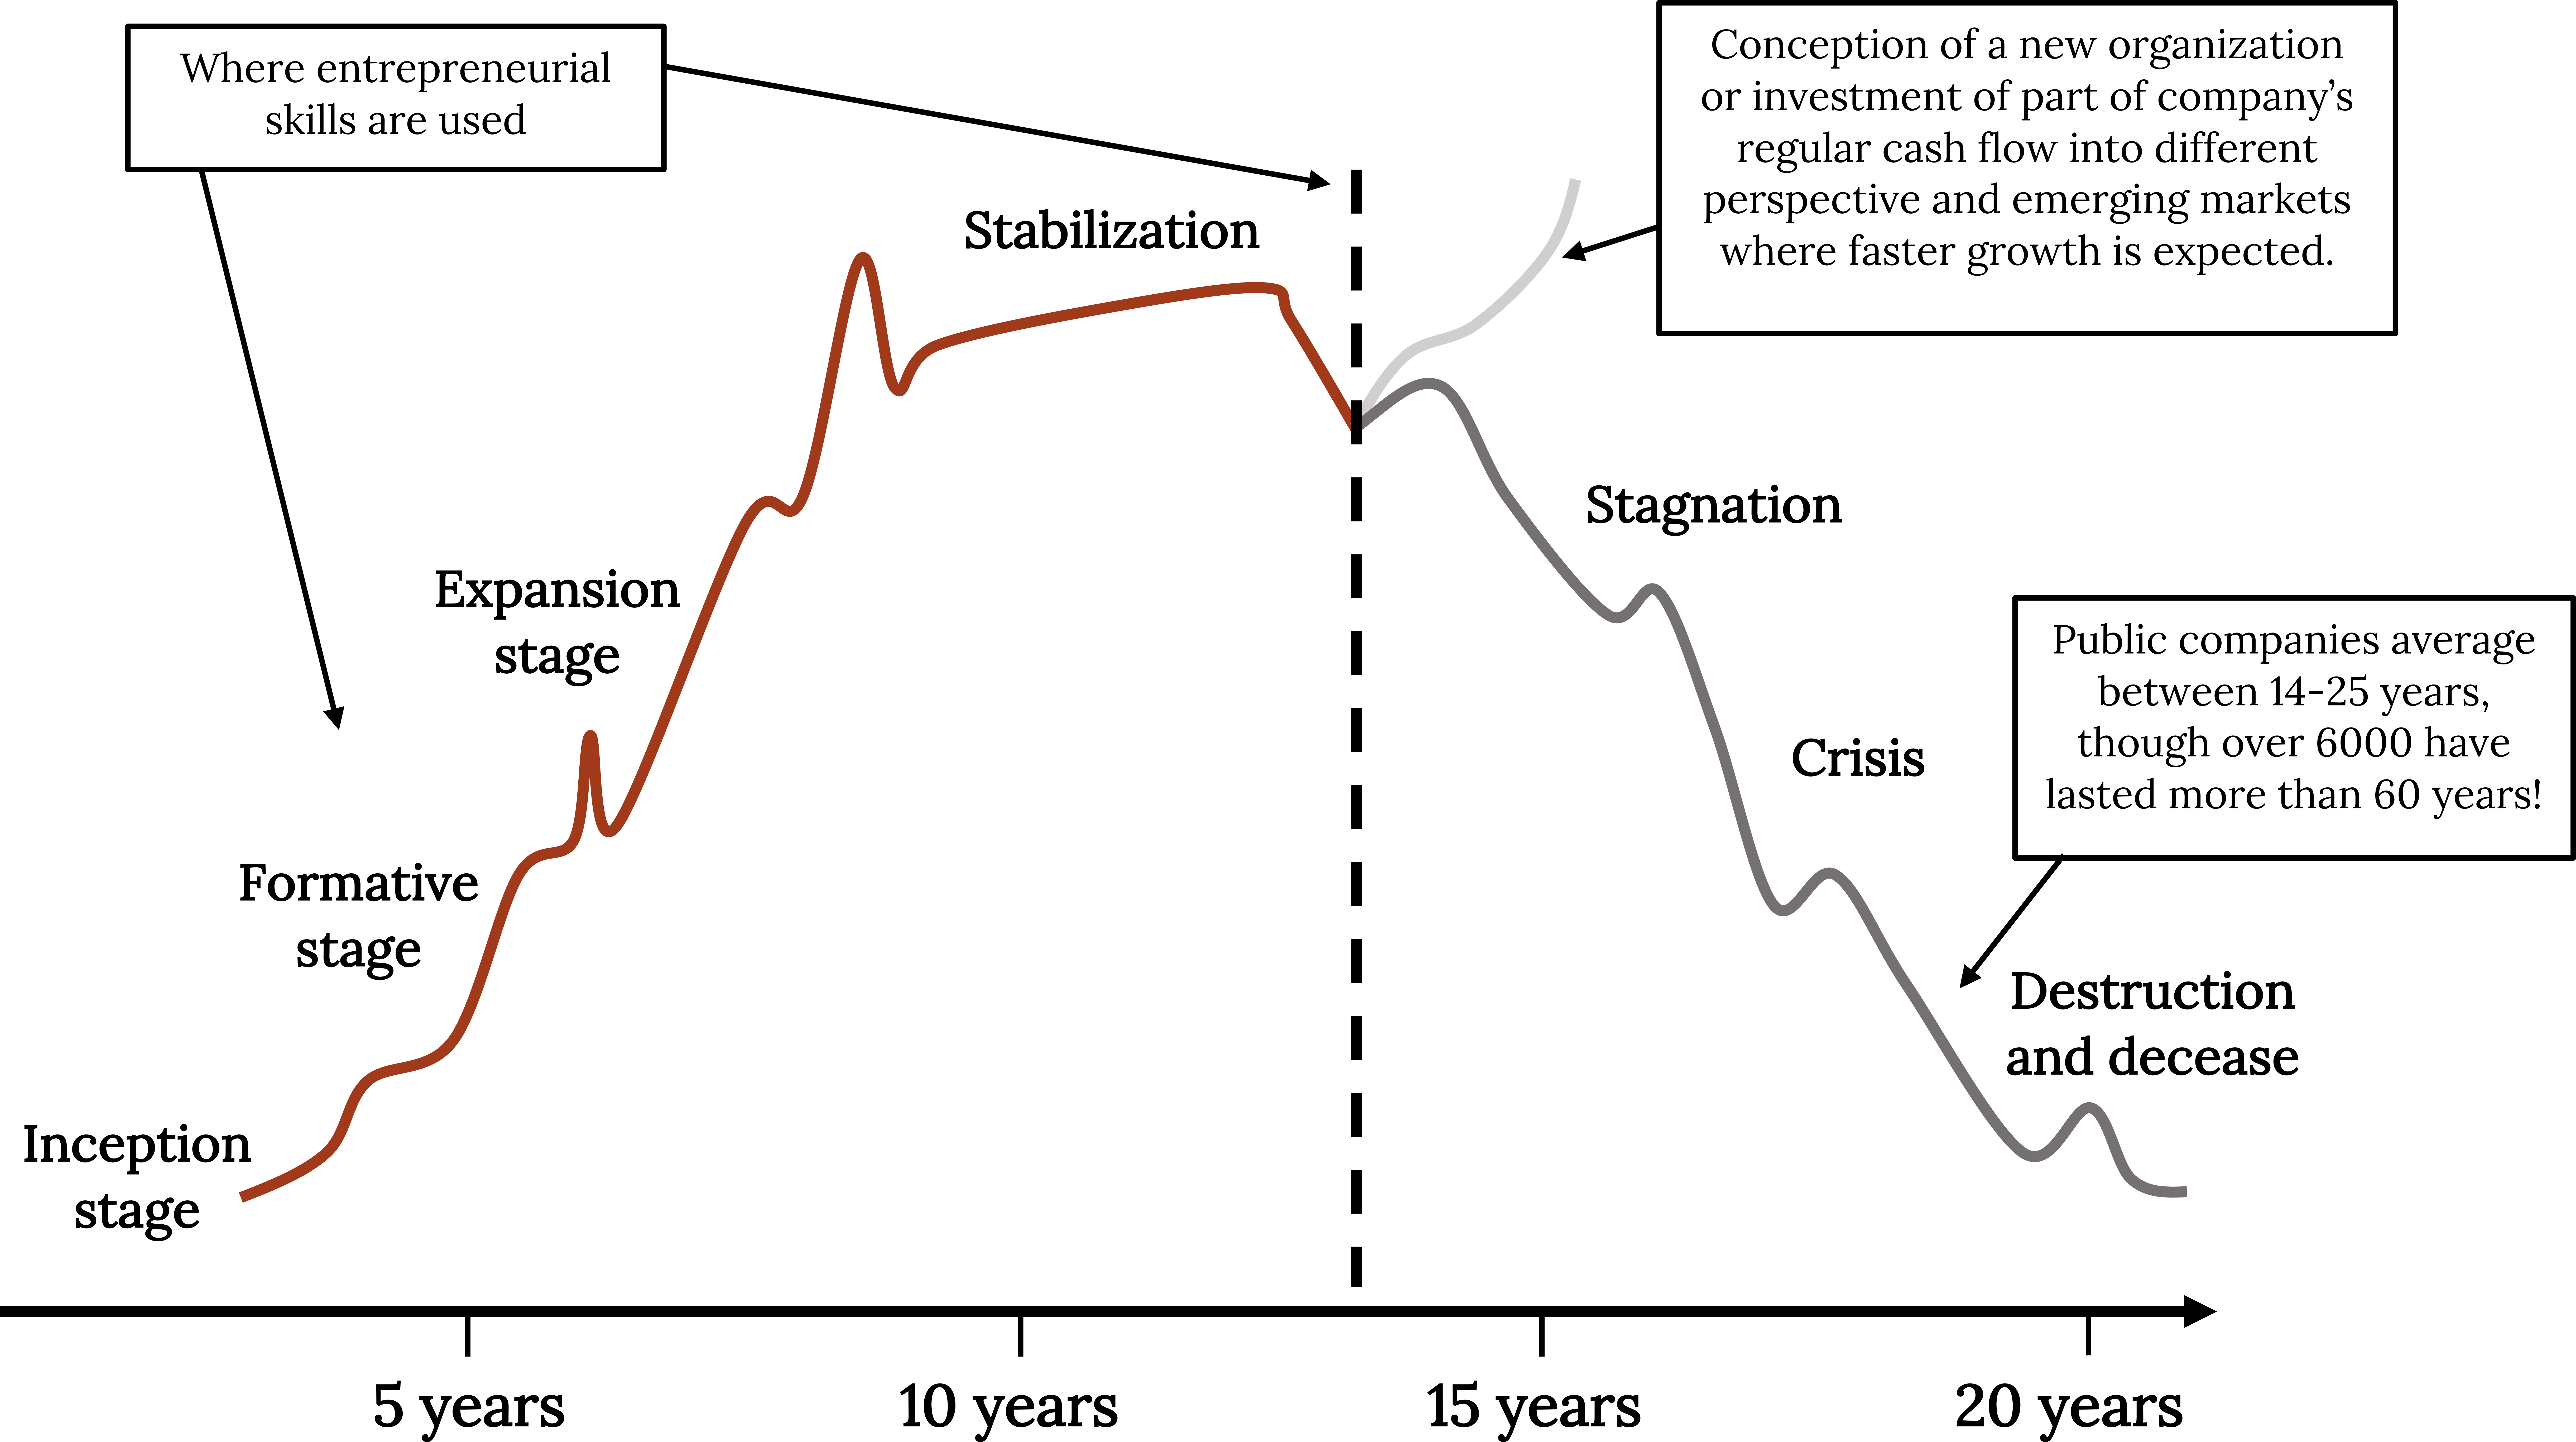 General timeline over 20 years with a line with some dips that mostly follows a bell curve, peaking around 14 years. Stages before peak: inception, formative, expansion, and stabilization. Stages after peak: stagnation, crisis, destruction and decease. Text box that points to formative and stabilization reads "Where entrepreneurial skills are used." Text box that points to destruction and decease reads "Public companies average between 14-25 years, though over 6000 have lasted more than 60 years!" There's an alternate line coming from the peak that trends upward with a text box that reads "conception of a new organization or investment of part of company's regualr cash flow into different perspective and emerging markets where faster growth is expected."